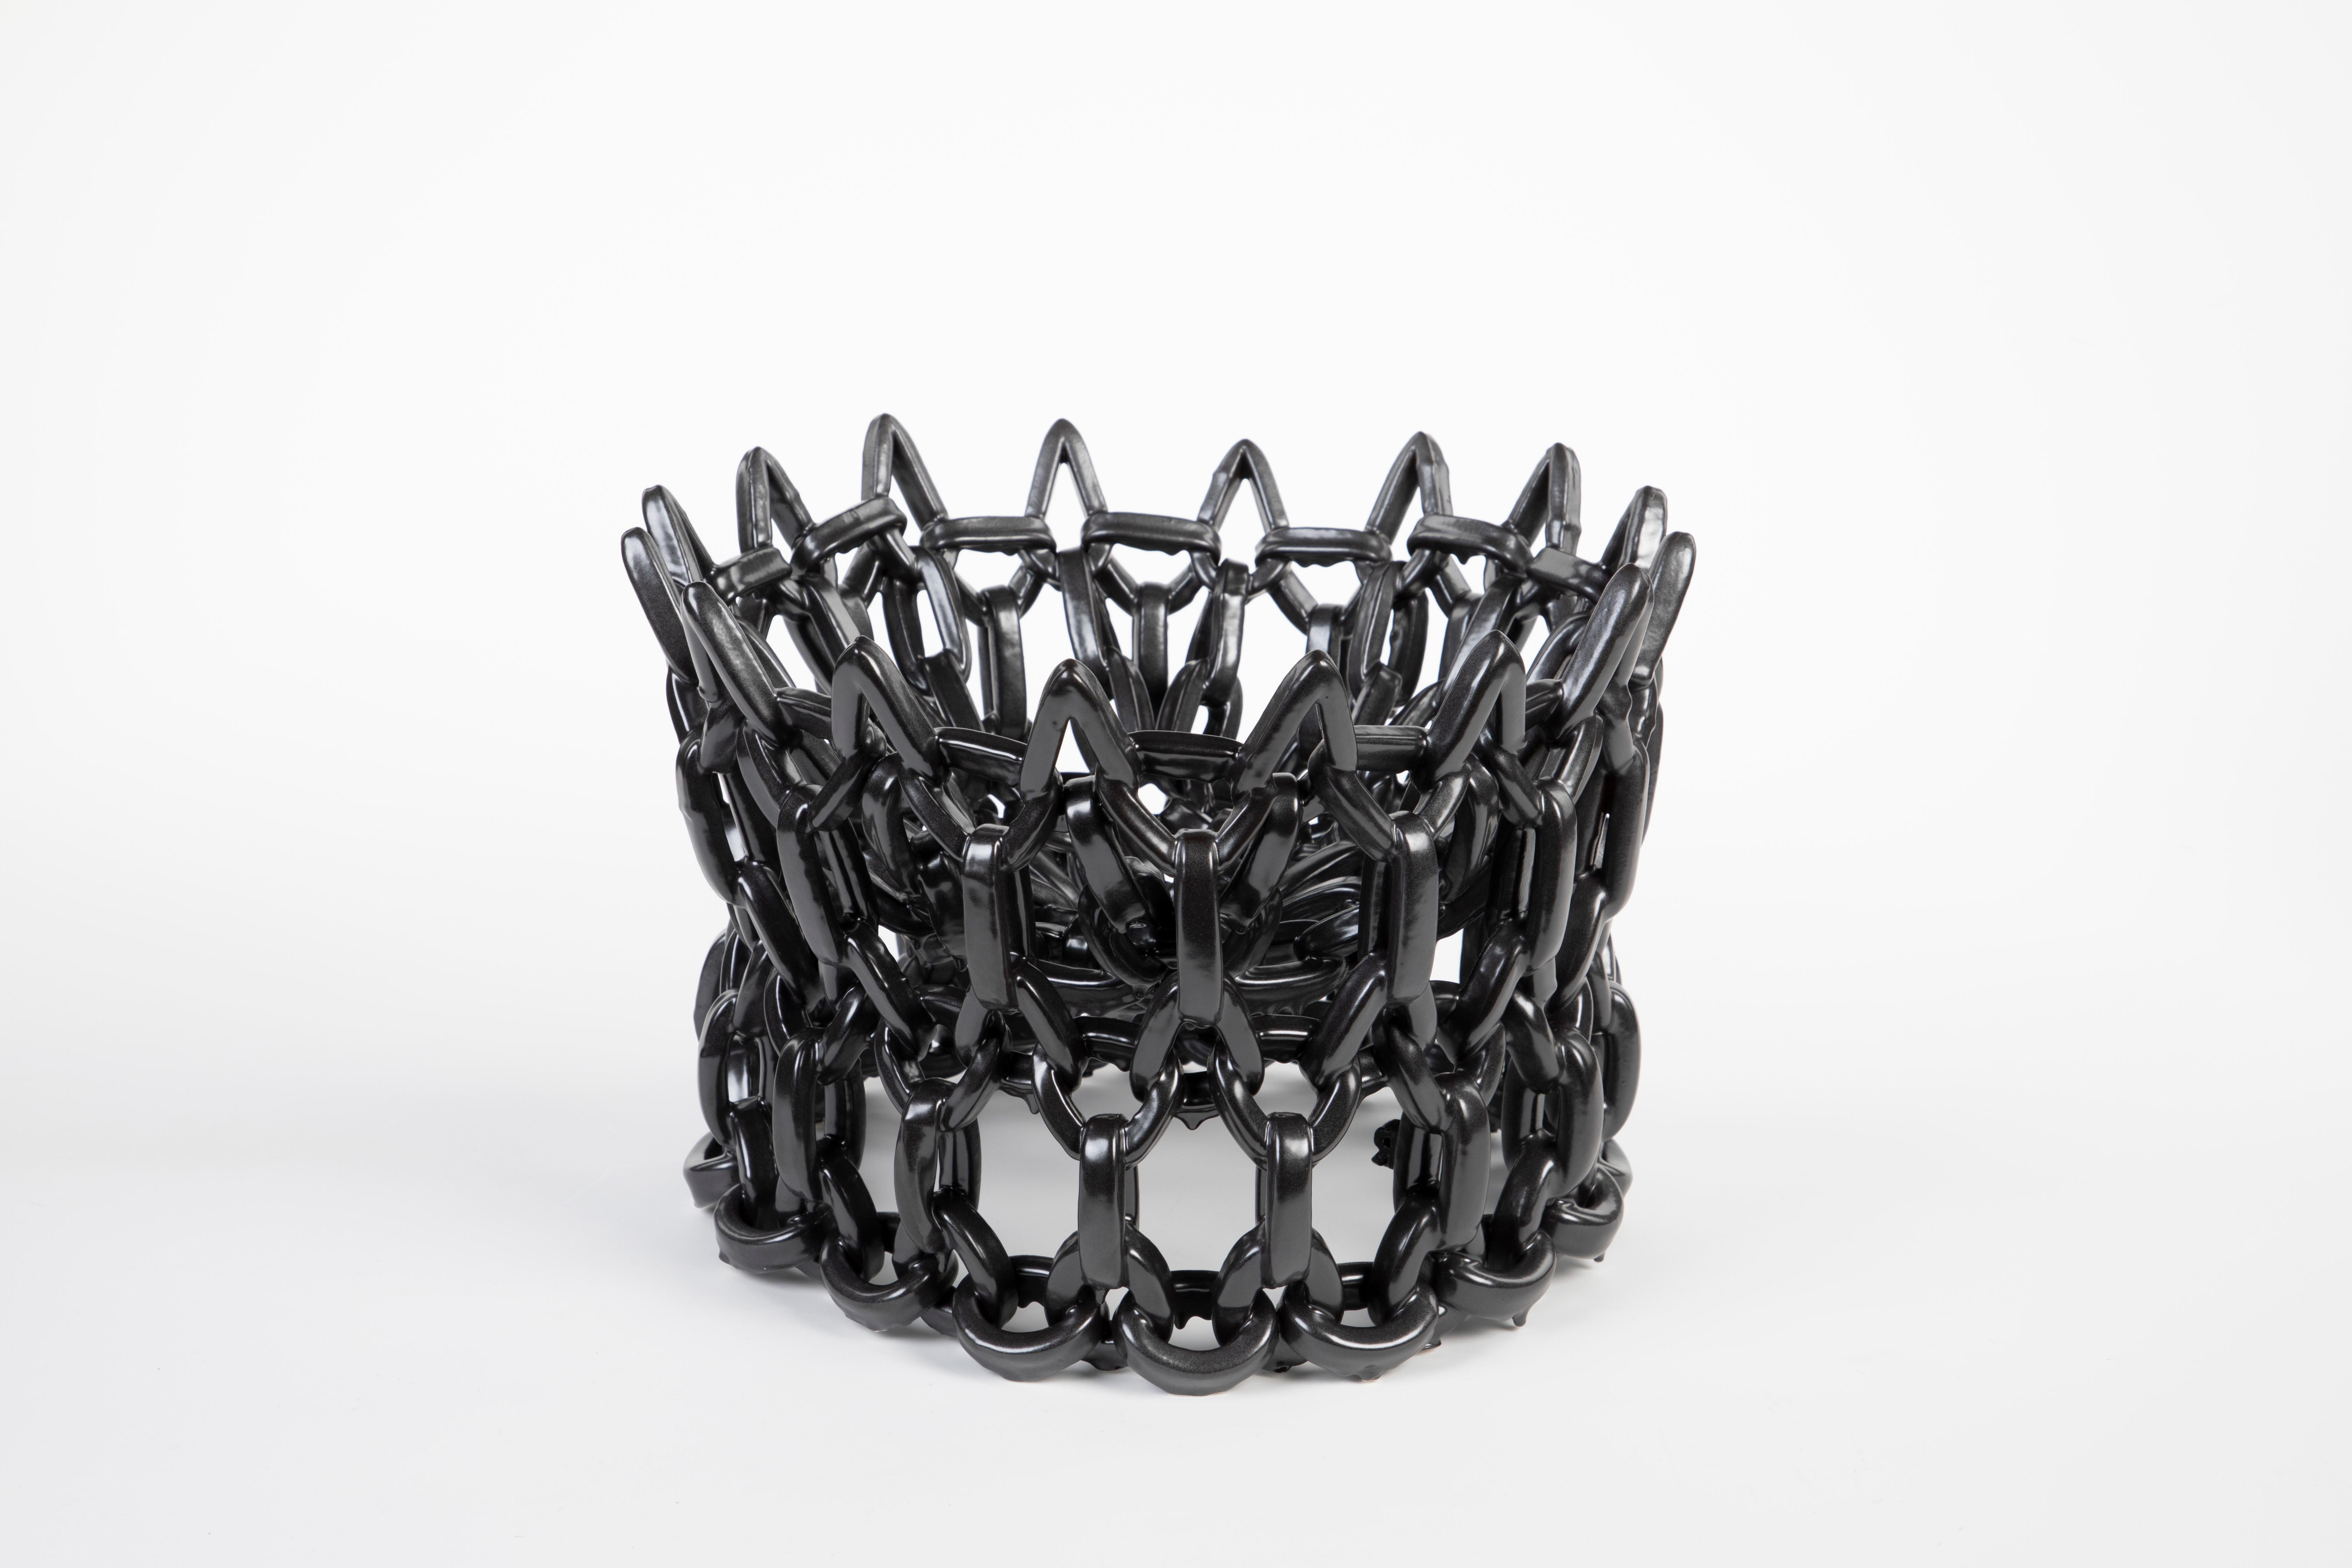 Extra large chain bowl by Atelier Fig
Dimensions: H 28 x Ø 42 cm.
Material: Porcelain, glaze. 
Color: Black metal.
Also available in other colors and finishes (glaze/ engobe/ lacquer).

Atelier Fig. is founded by the Dutch designers Gijs